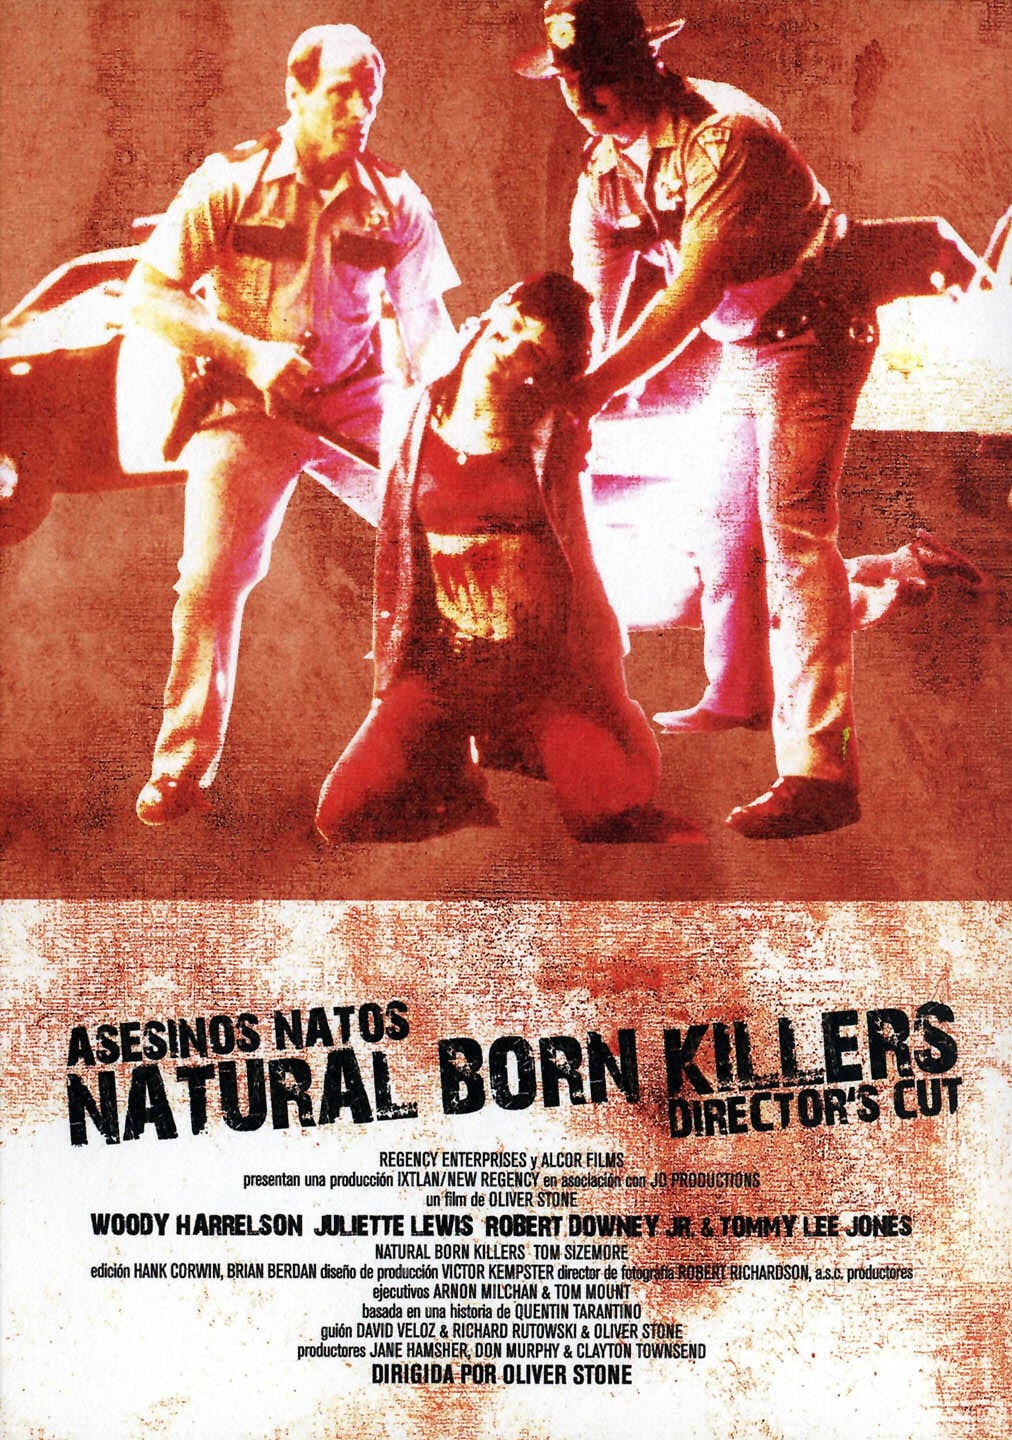 Where can i watch natural born killers for free